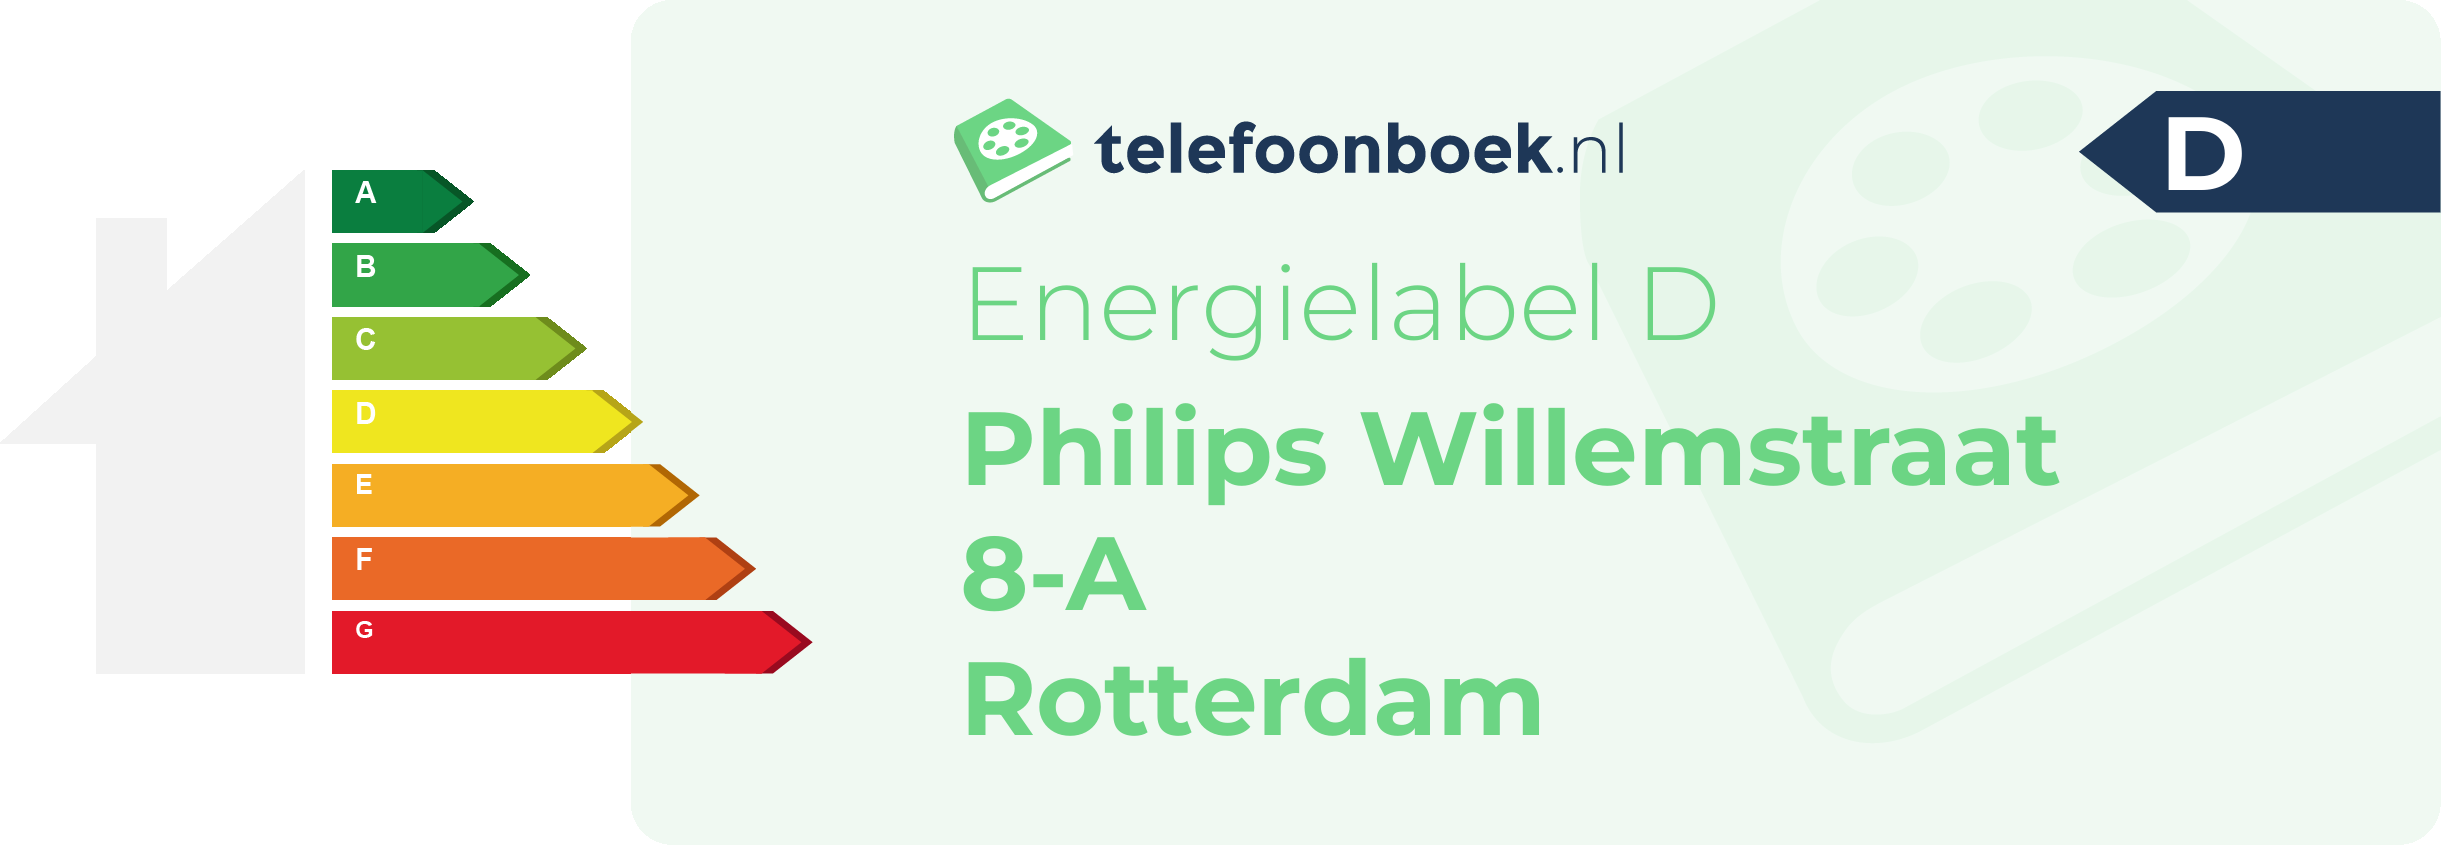 Energielabel Philips Willemstraat 8-A Rotterdam